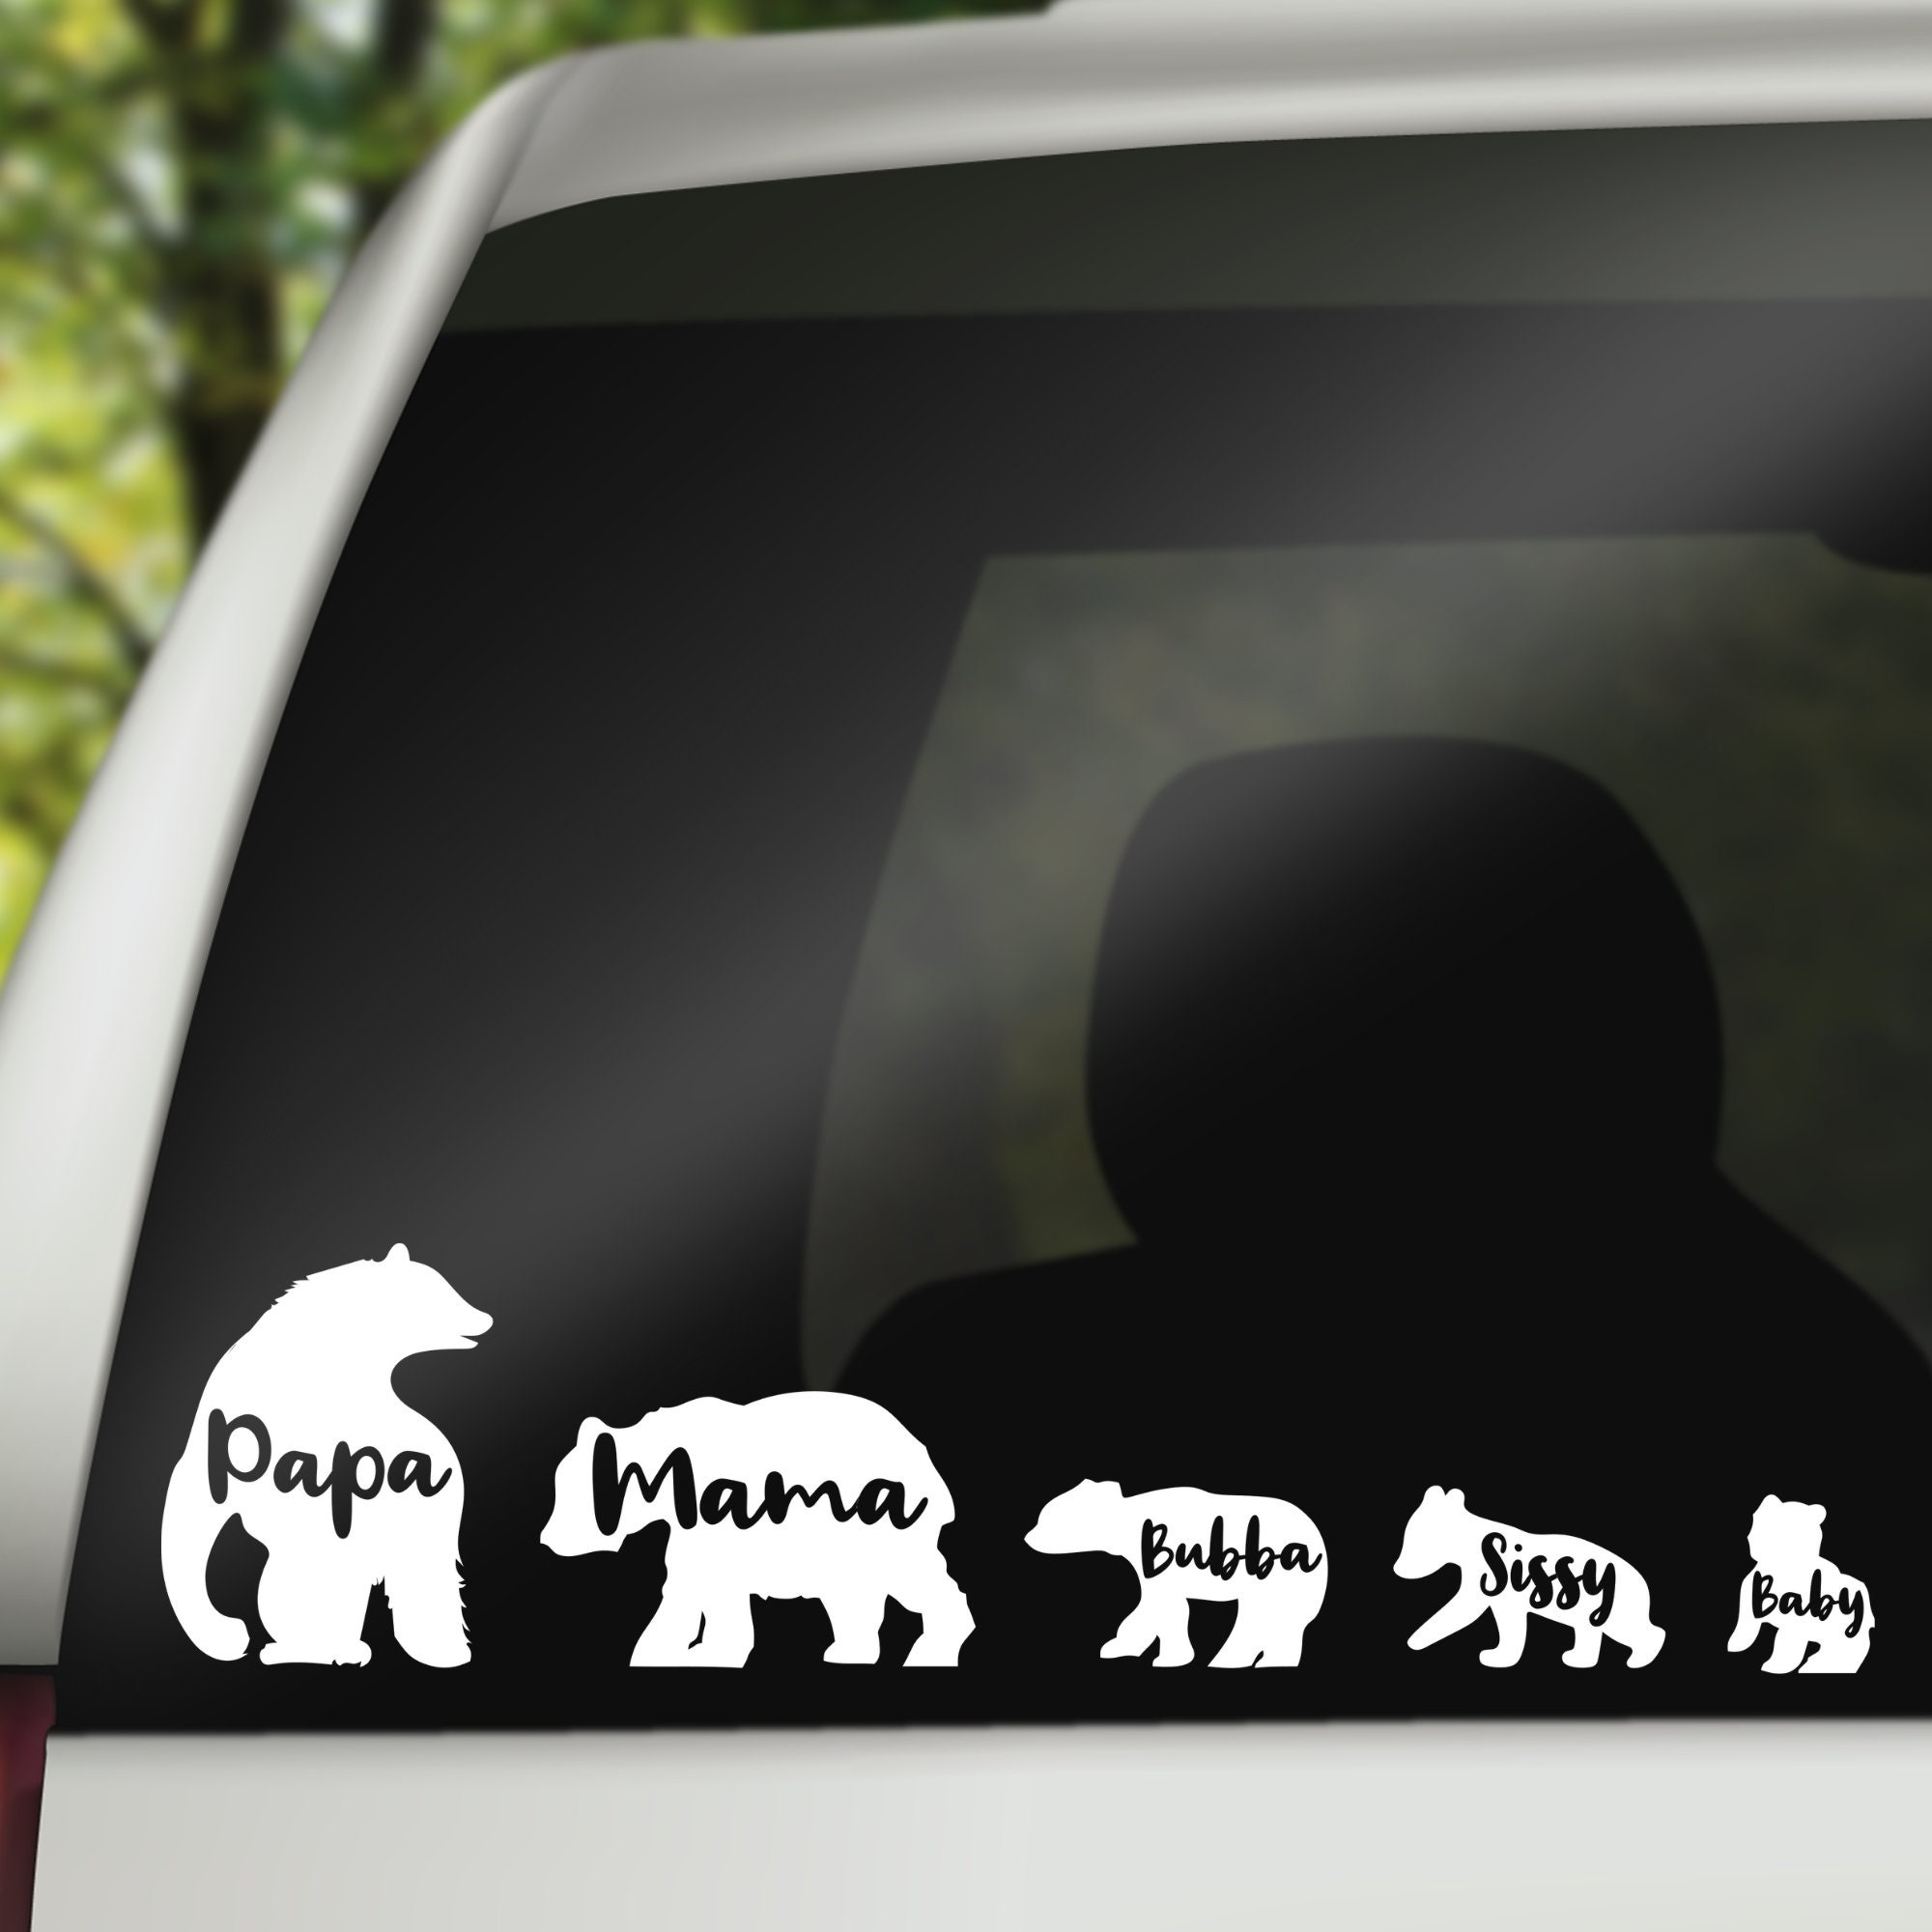 Mama Papa Bear With 6 Cubs White Vinyl Car Decal New Gift 